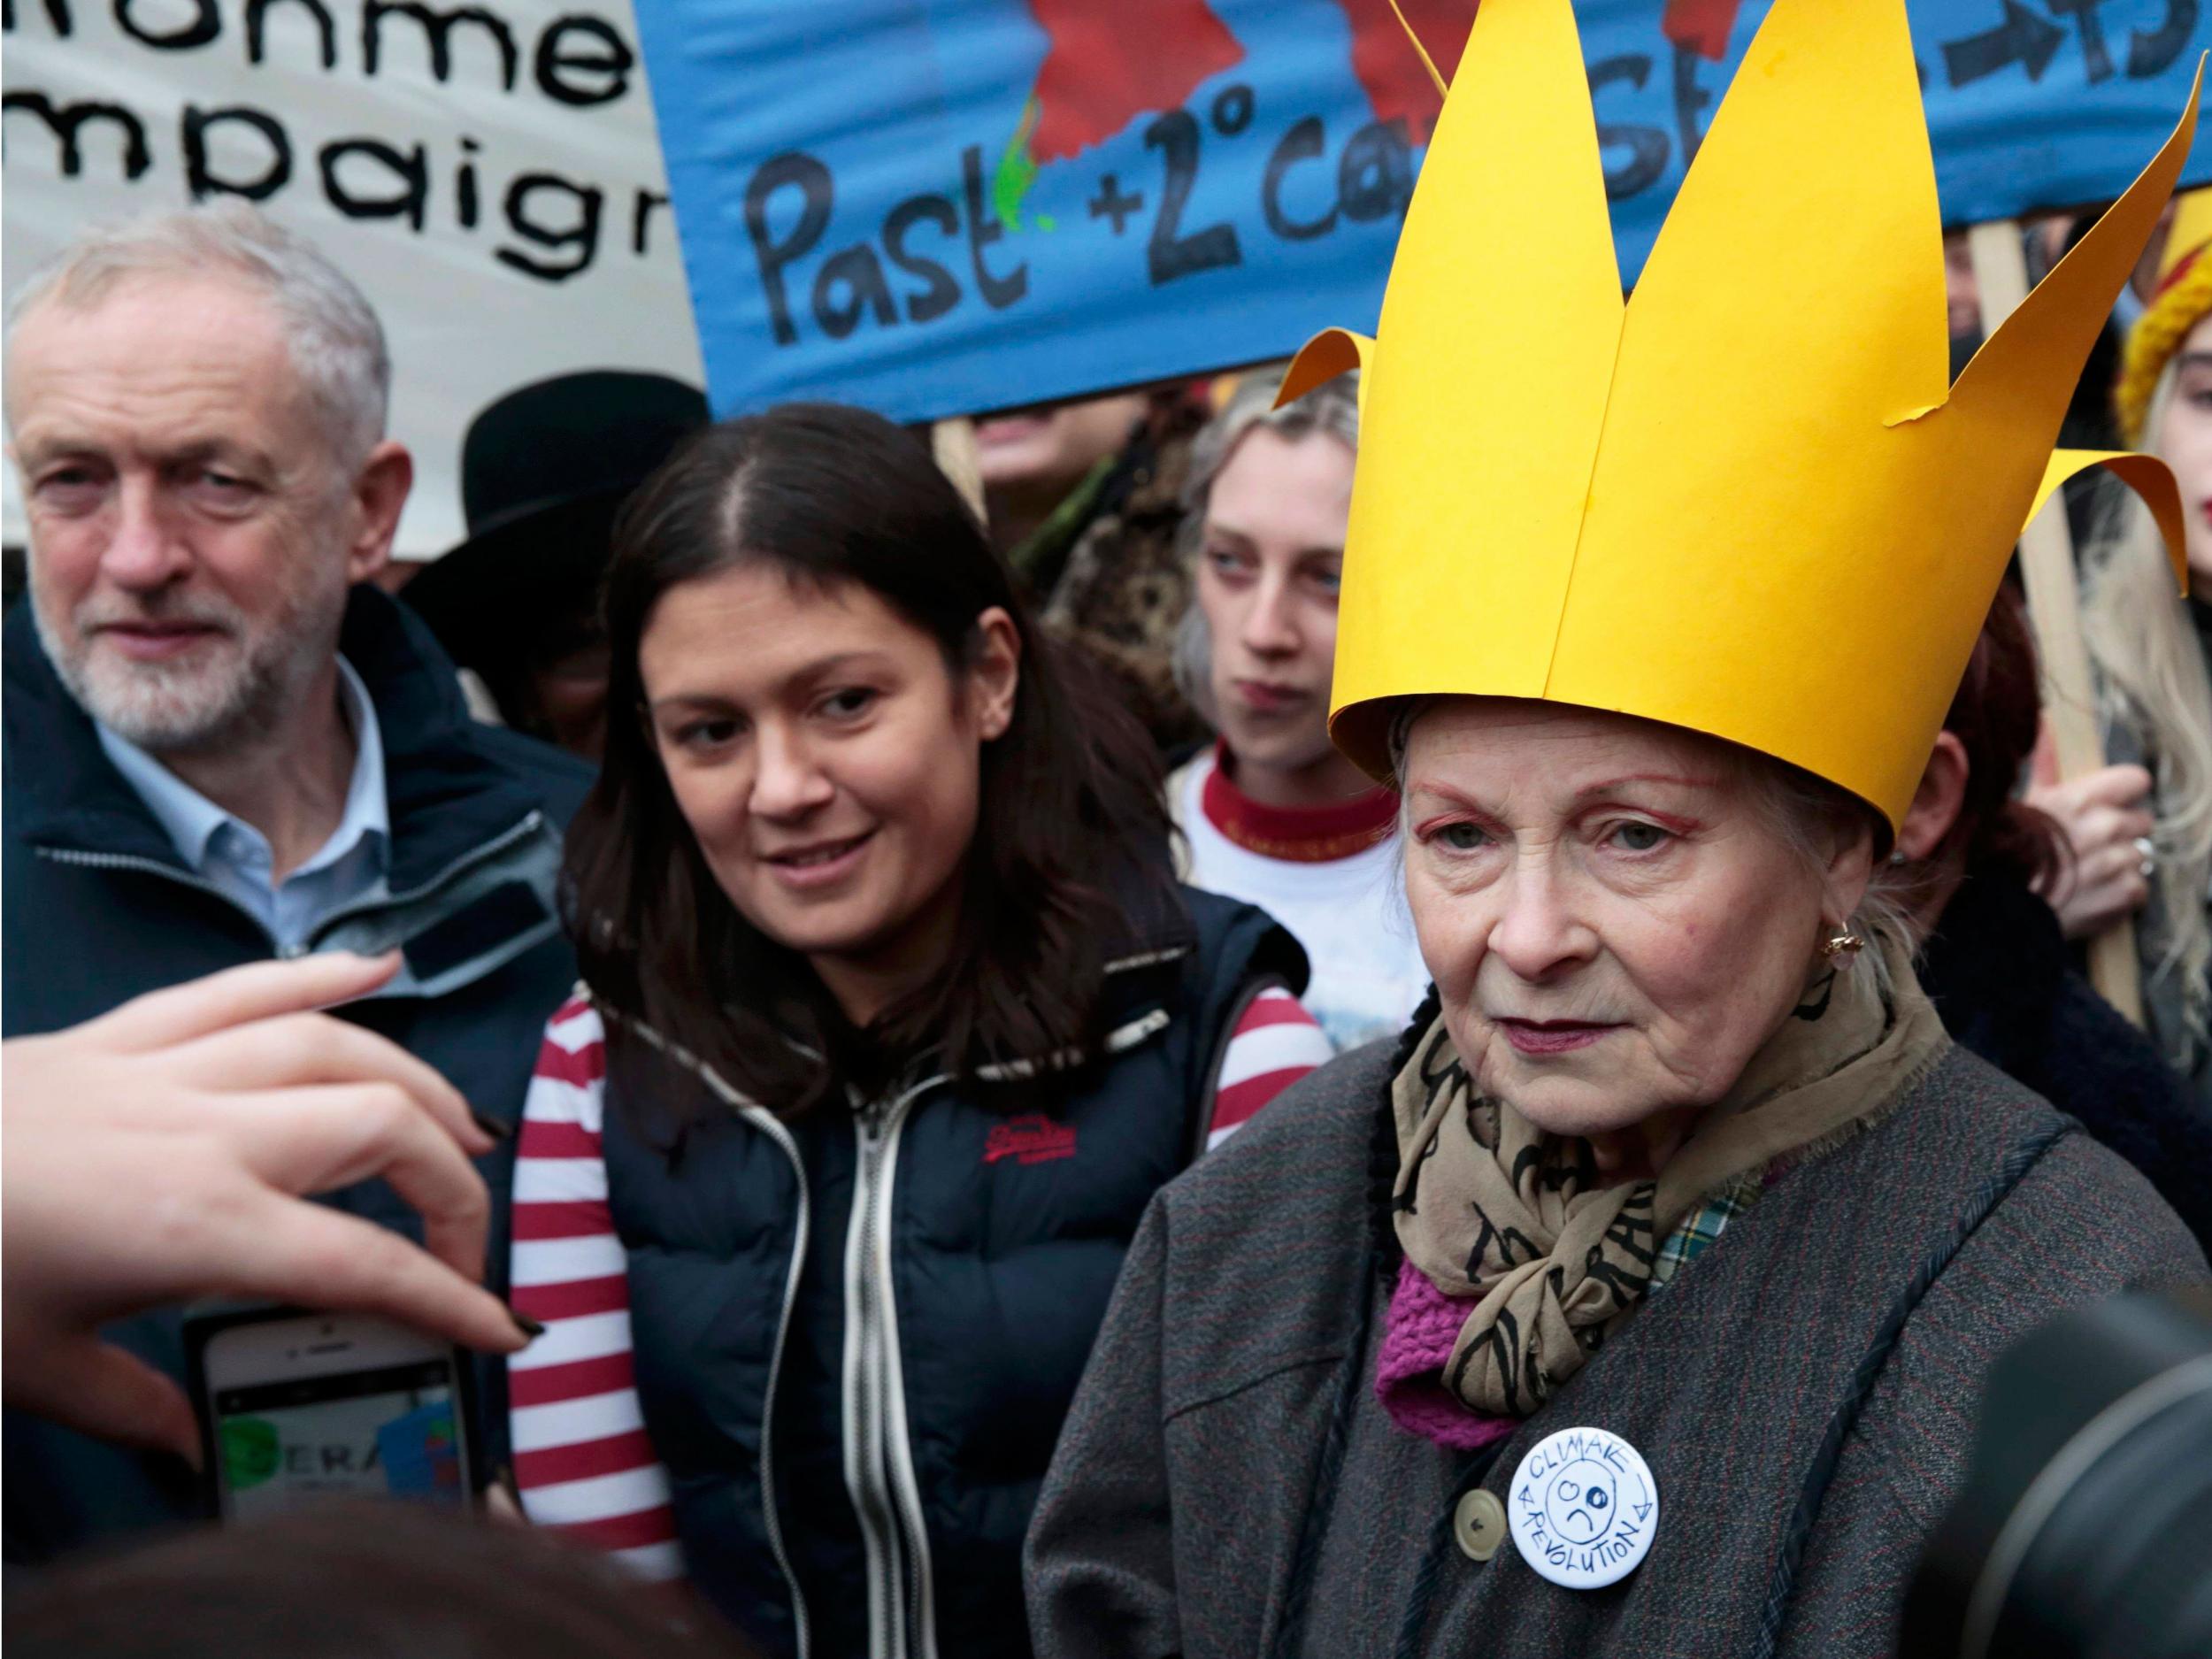 Britain's leader of the opposition Labour Party, Jeremy Corbyn (L), and fashion designer Vivienne Westwood (R) attend a rally held the day before the start of the Paris Climate Change Summit, in London